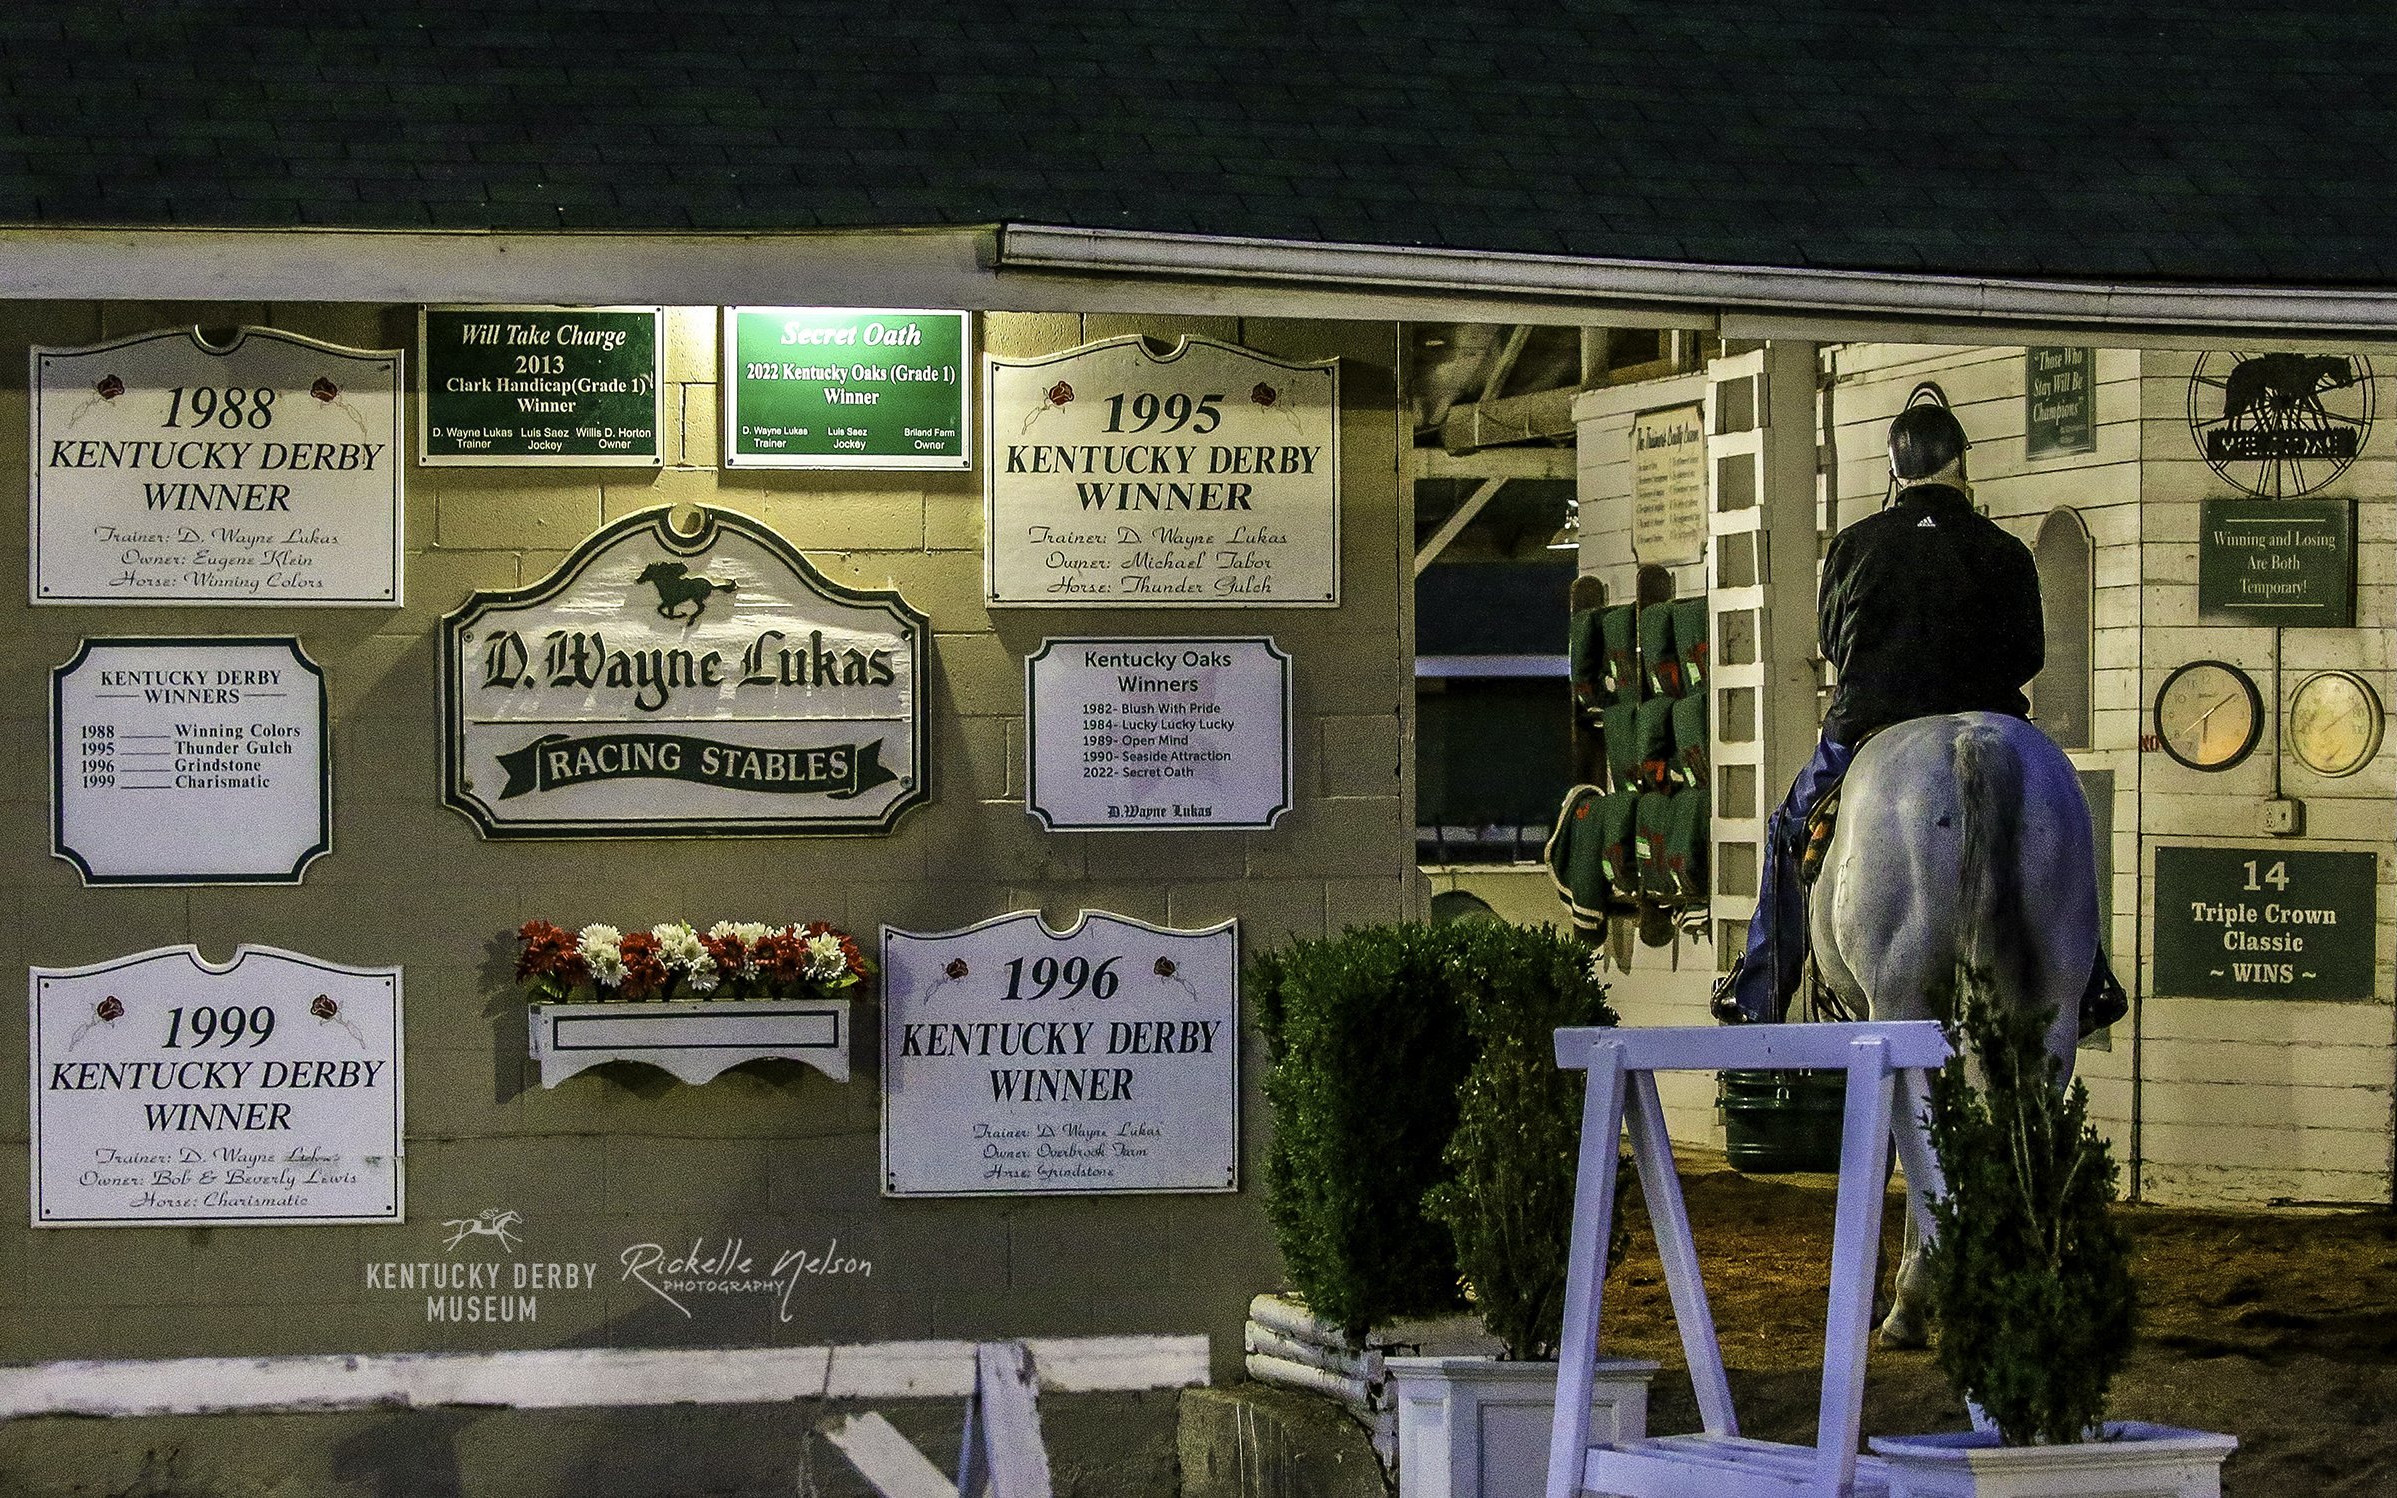 Kentucky Derby Museum to honor D. Wayne Lukas with inaugural Lifetime Achievement Award